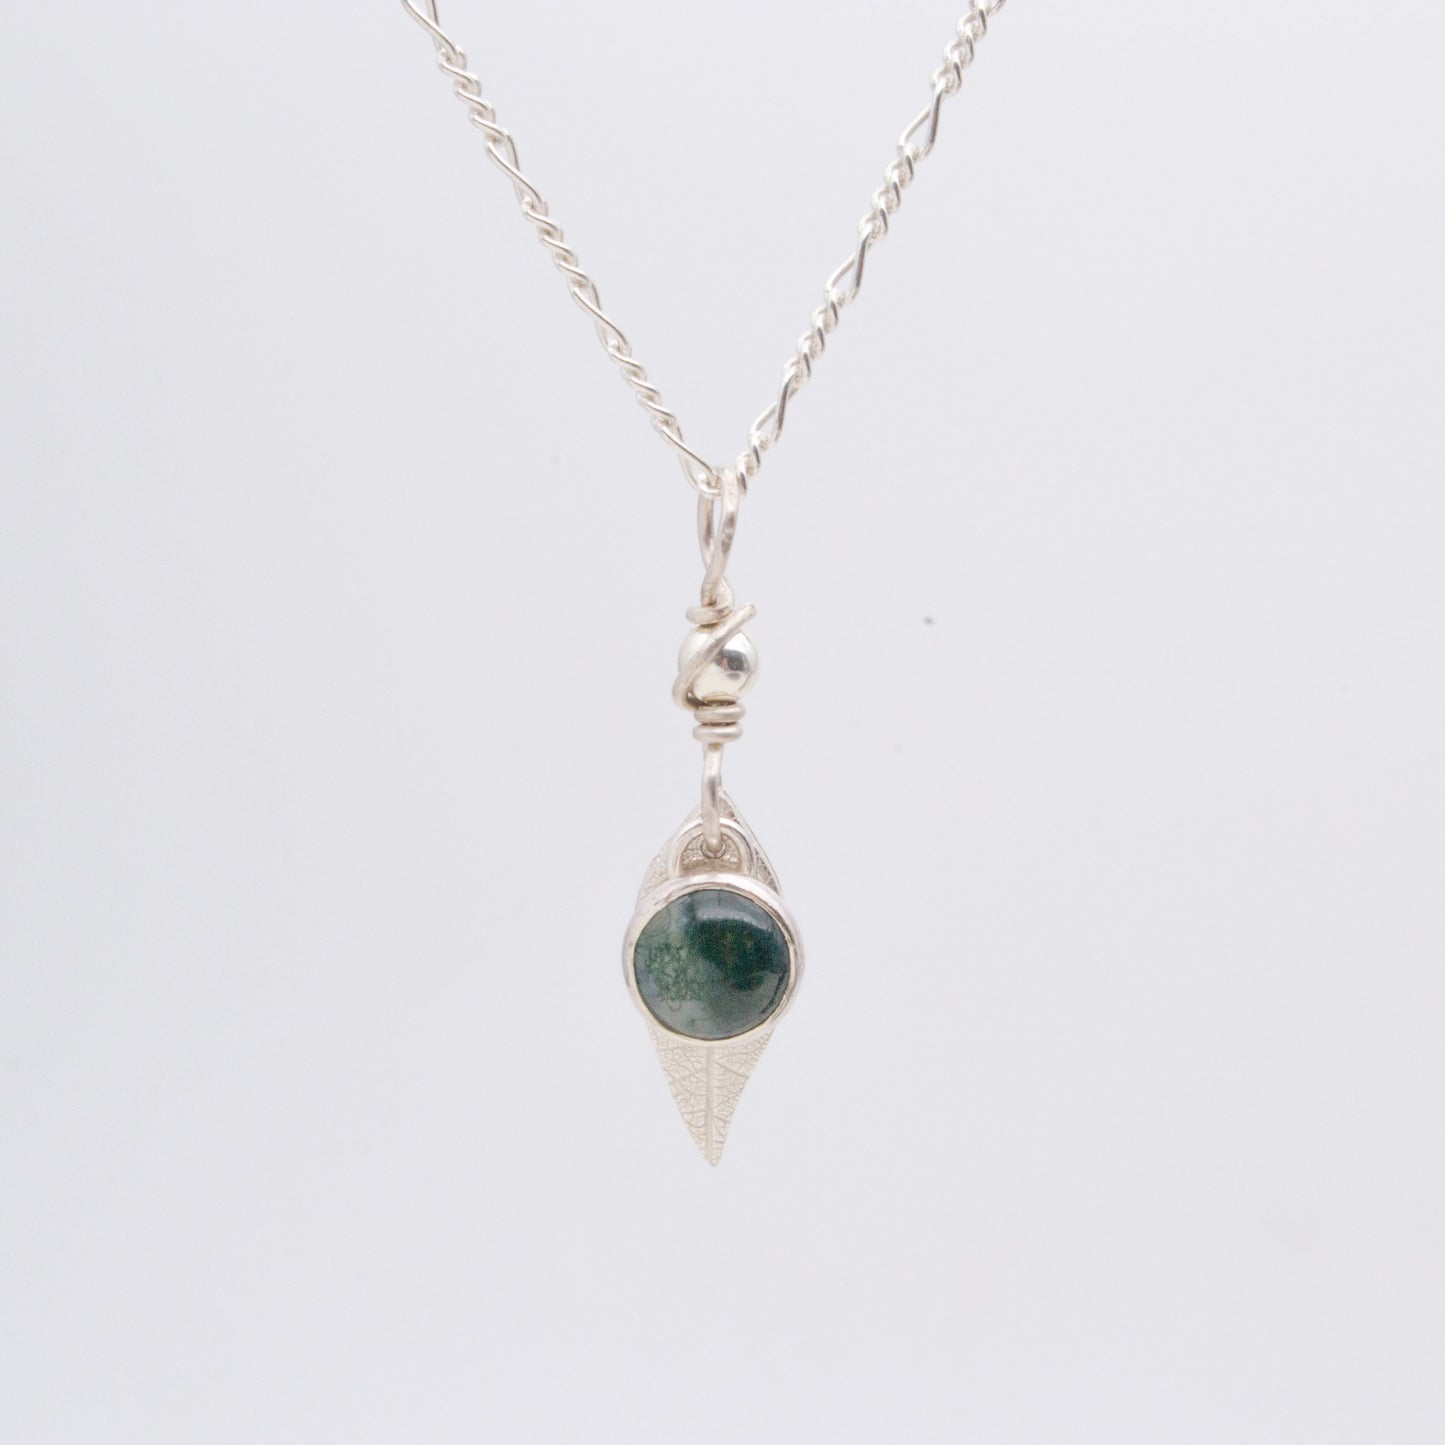 Moss agate pendant with silver leaf